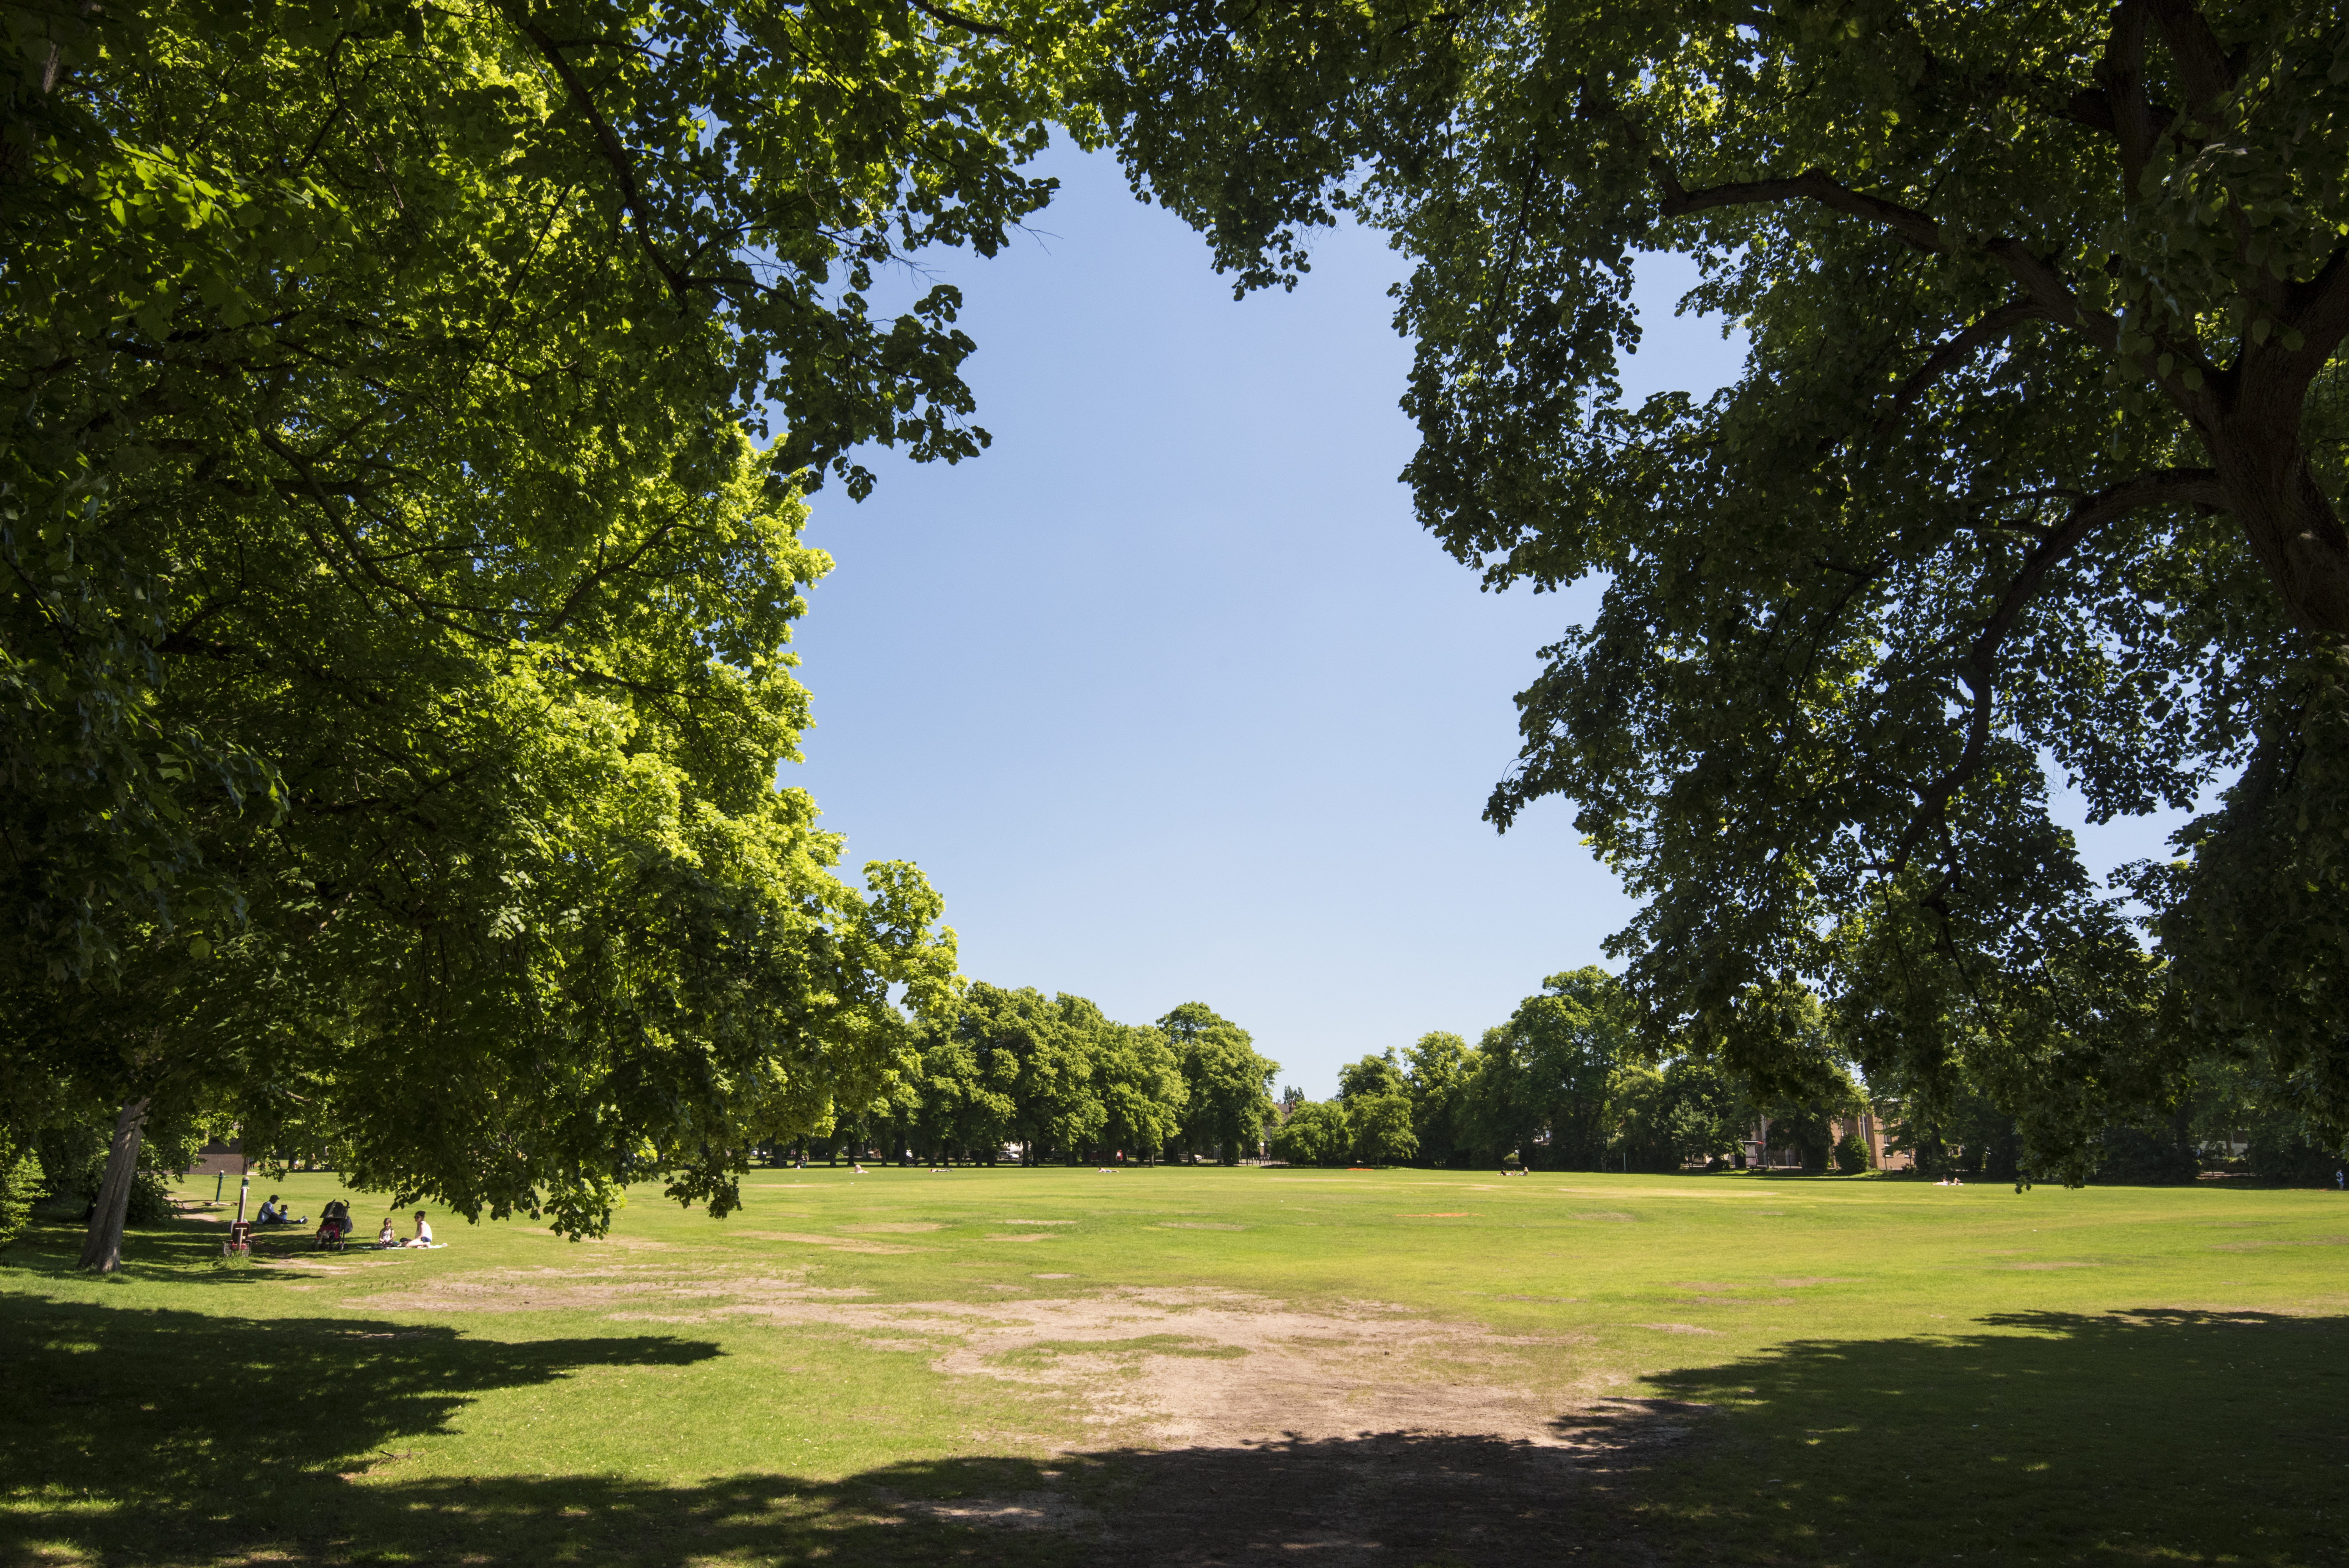 An image of Fairfield Recreation Ground on a sunny day.